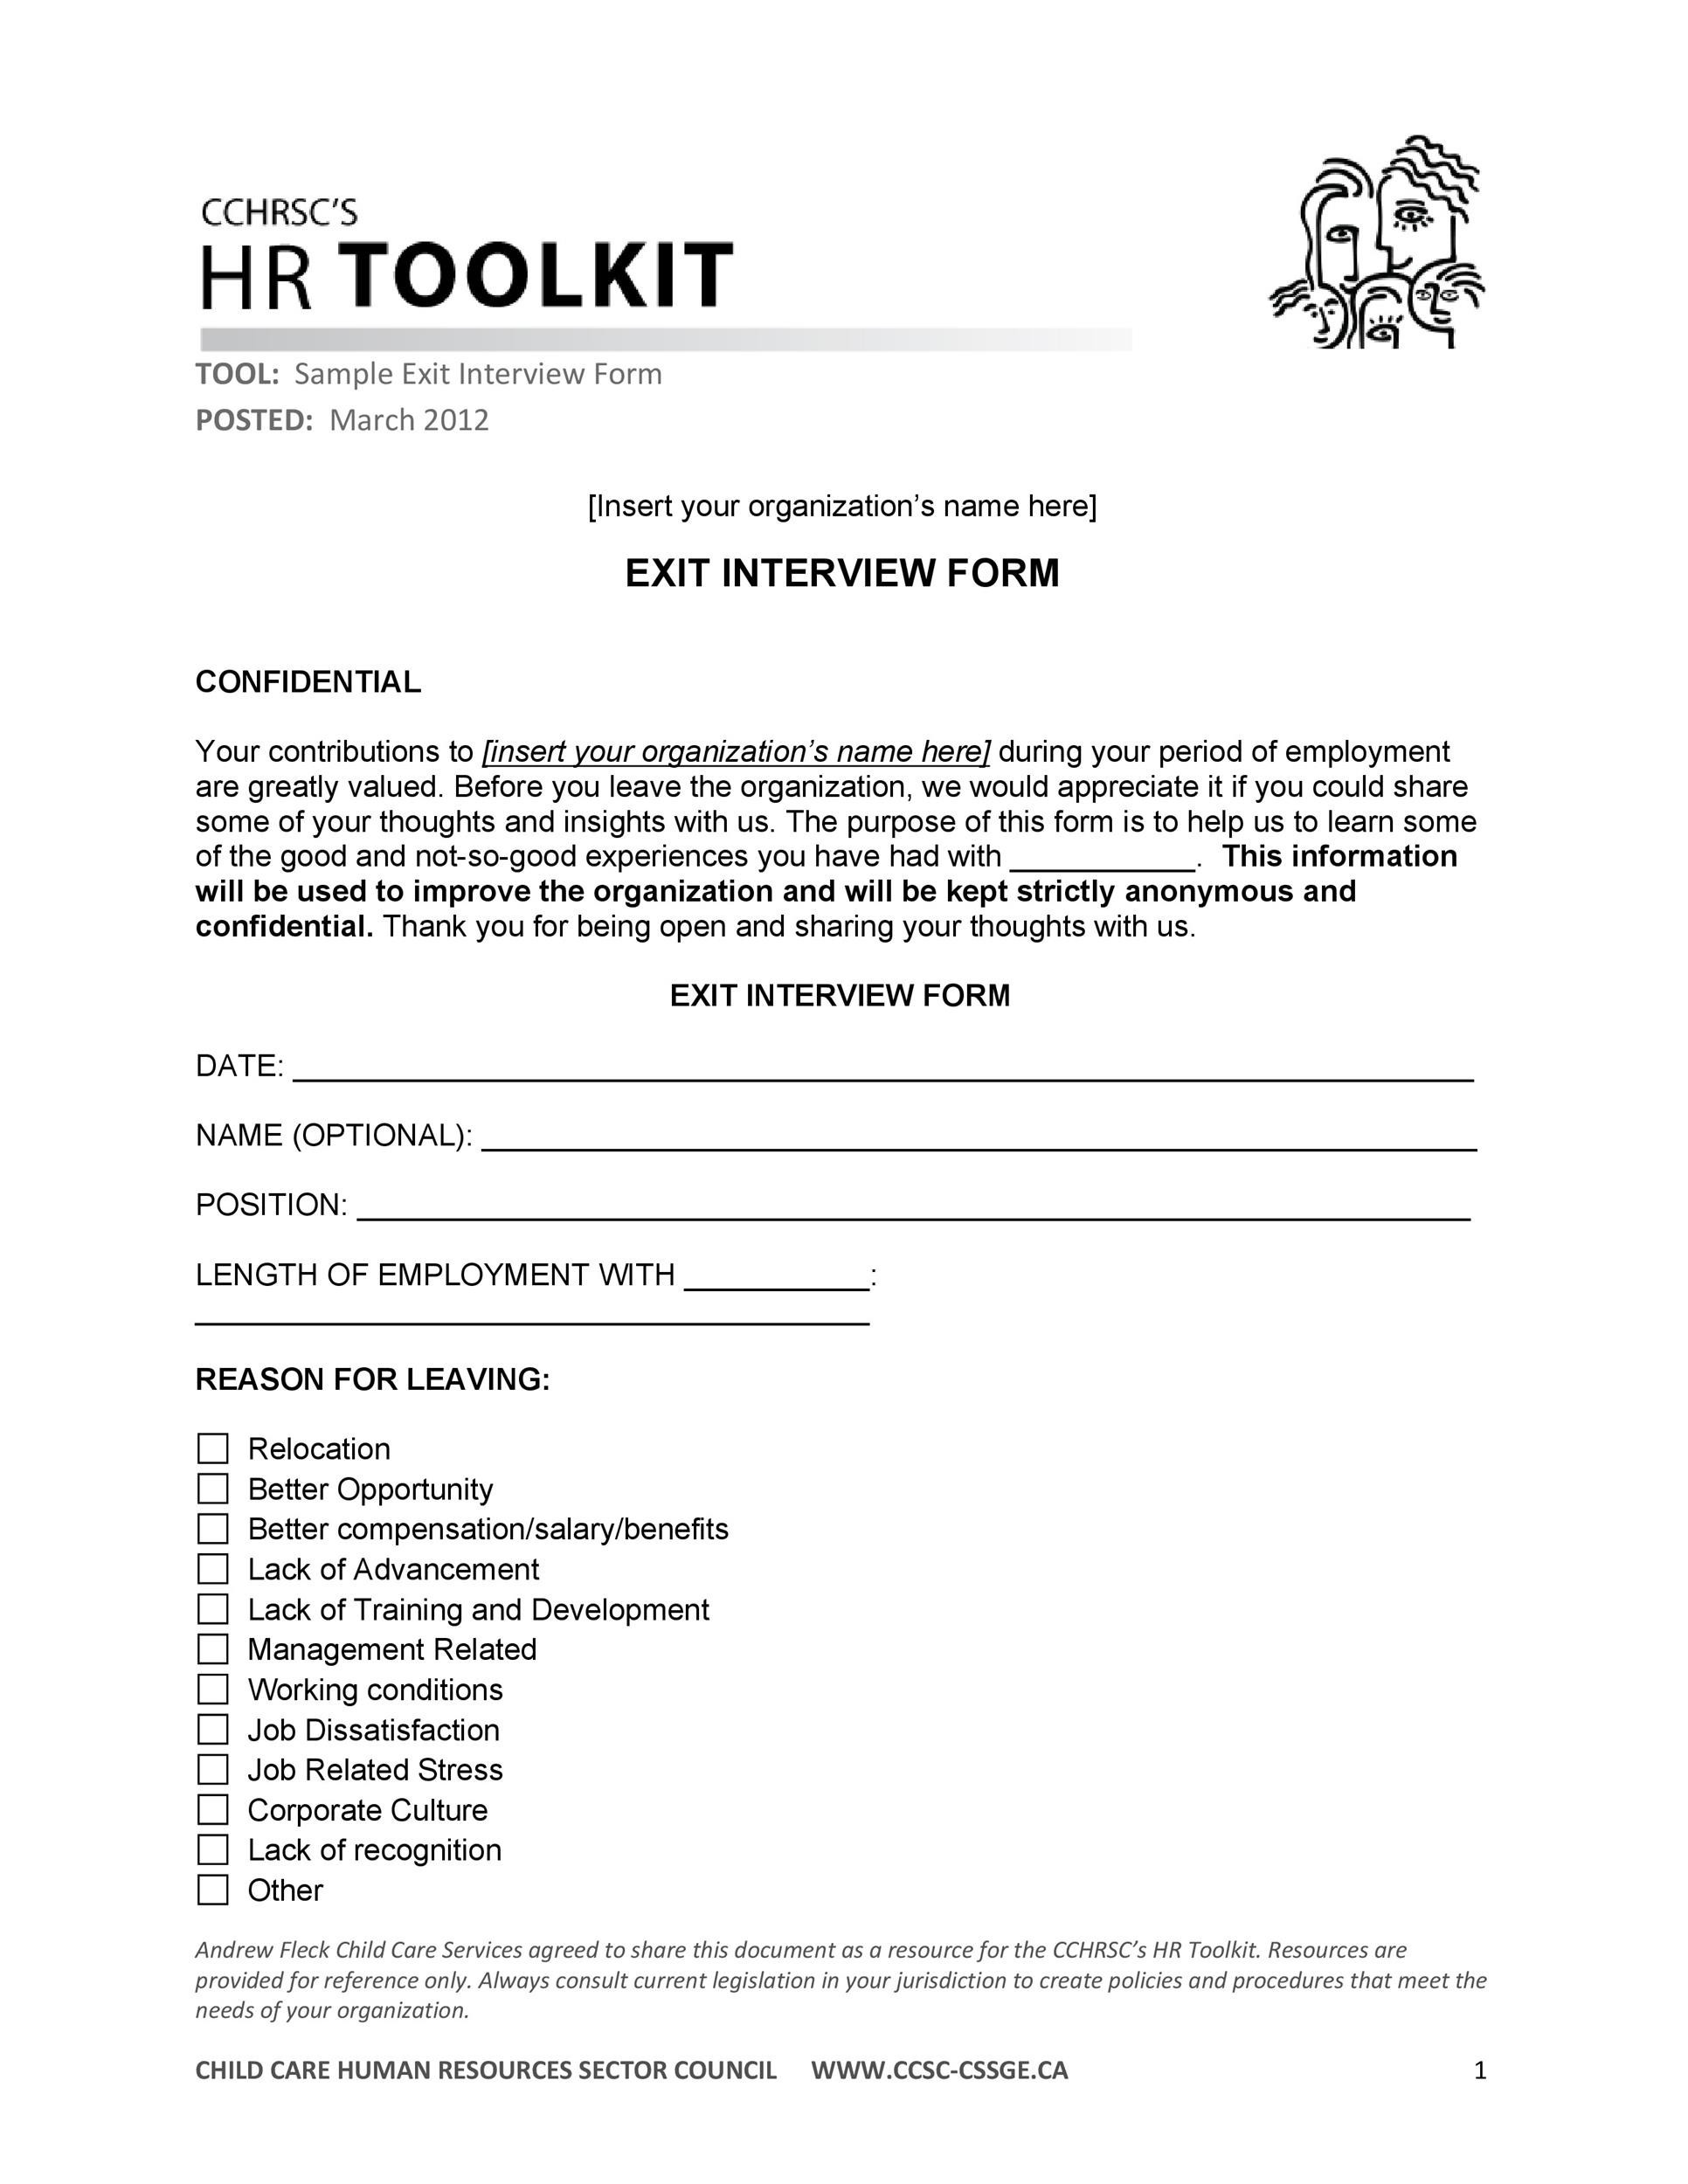 40 Best Exit Interview Templates Forms ᐅ TemplateLab